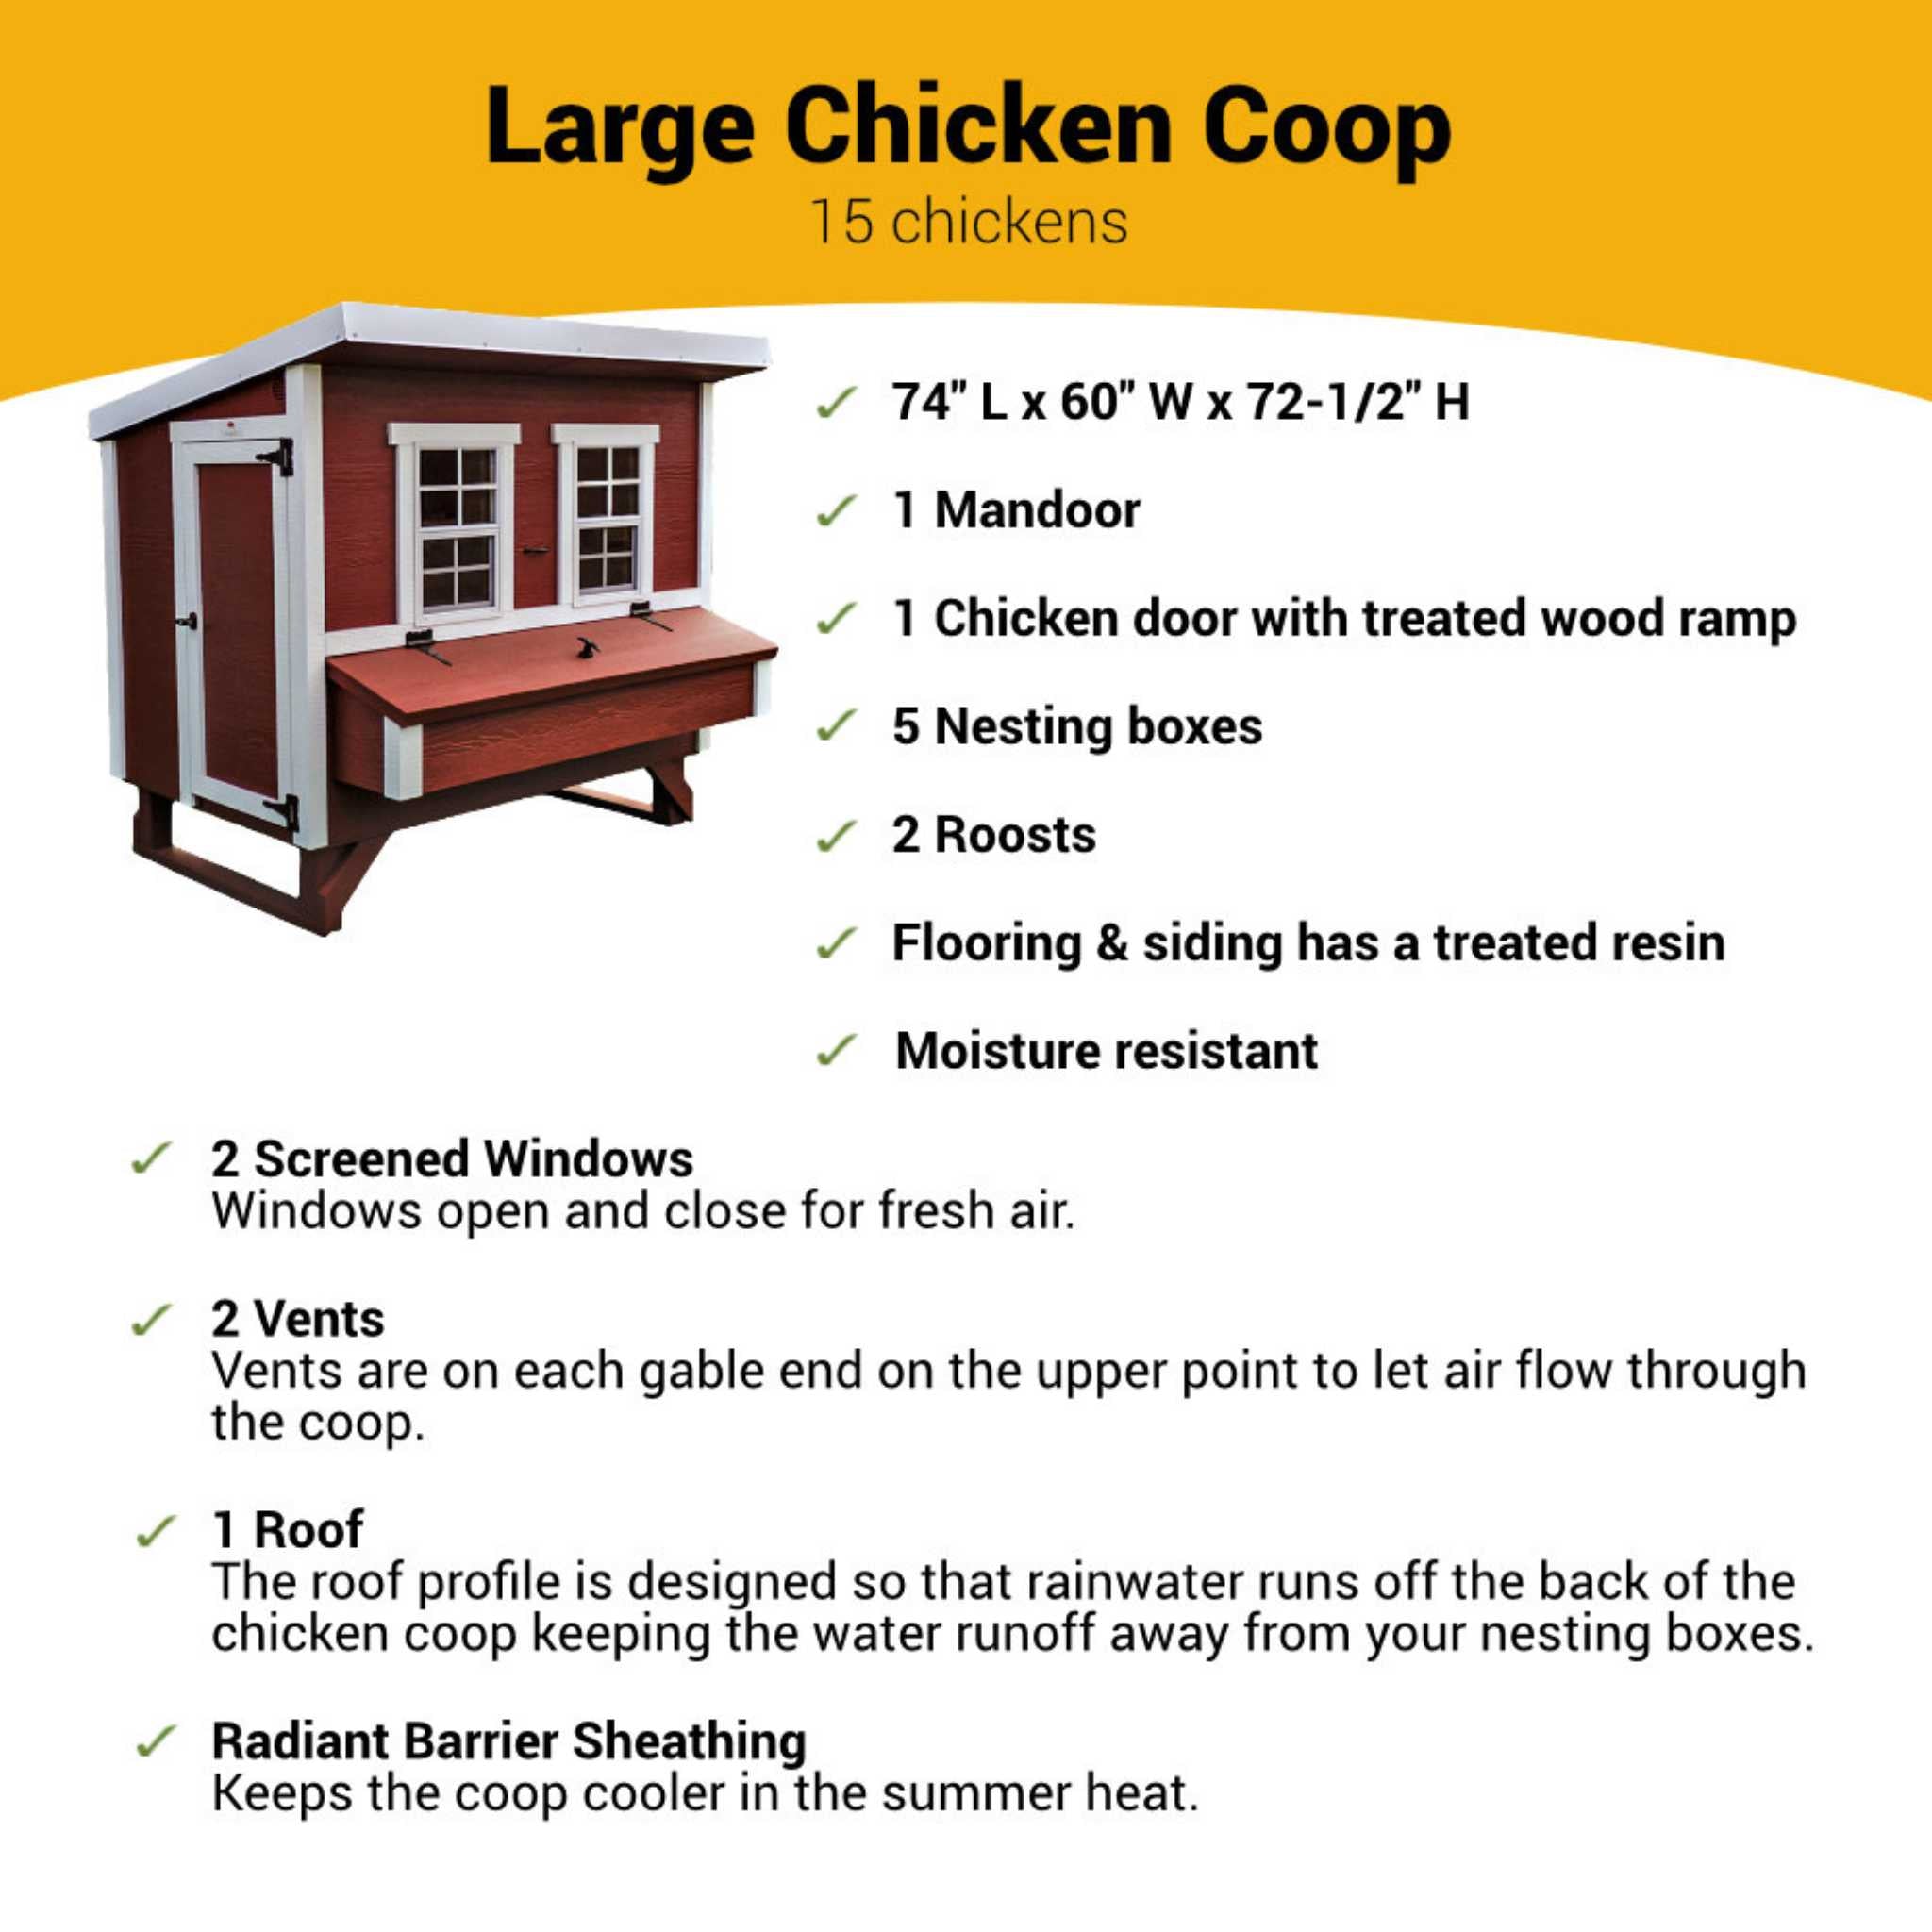 Hatching Time OverEZ large chicken coop can hold 15 chickens. Infographic shows features for windows, nesting boxes, roosts and dimensions.